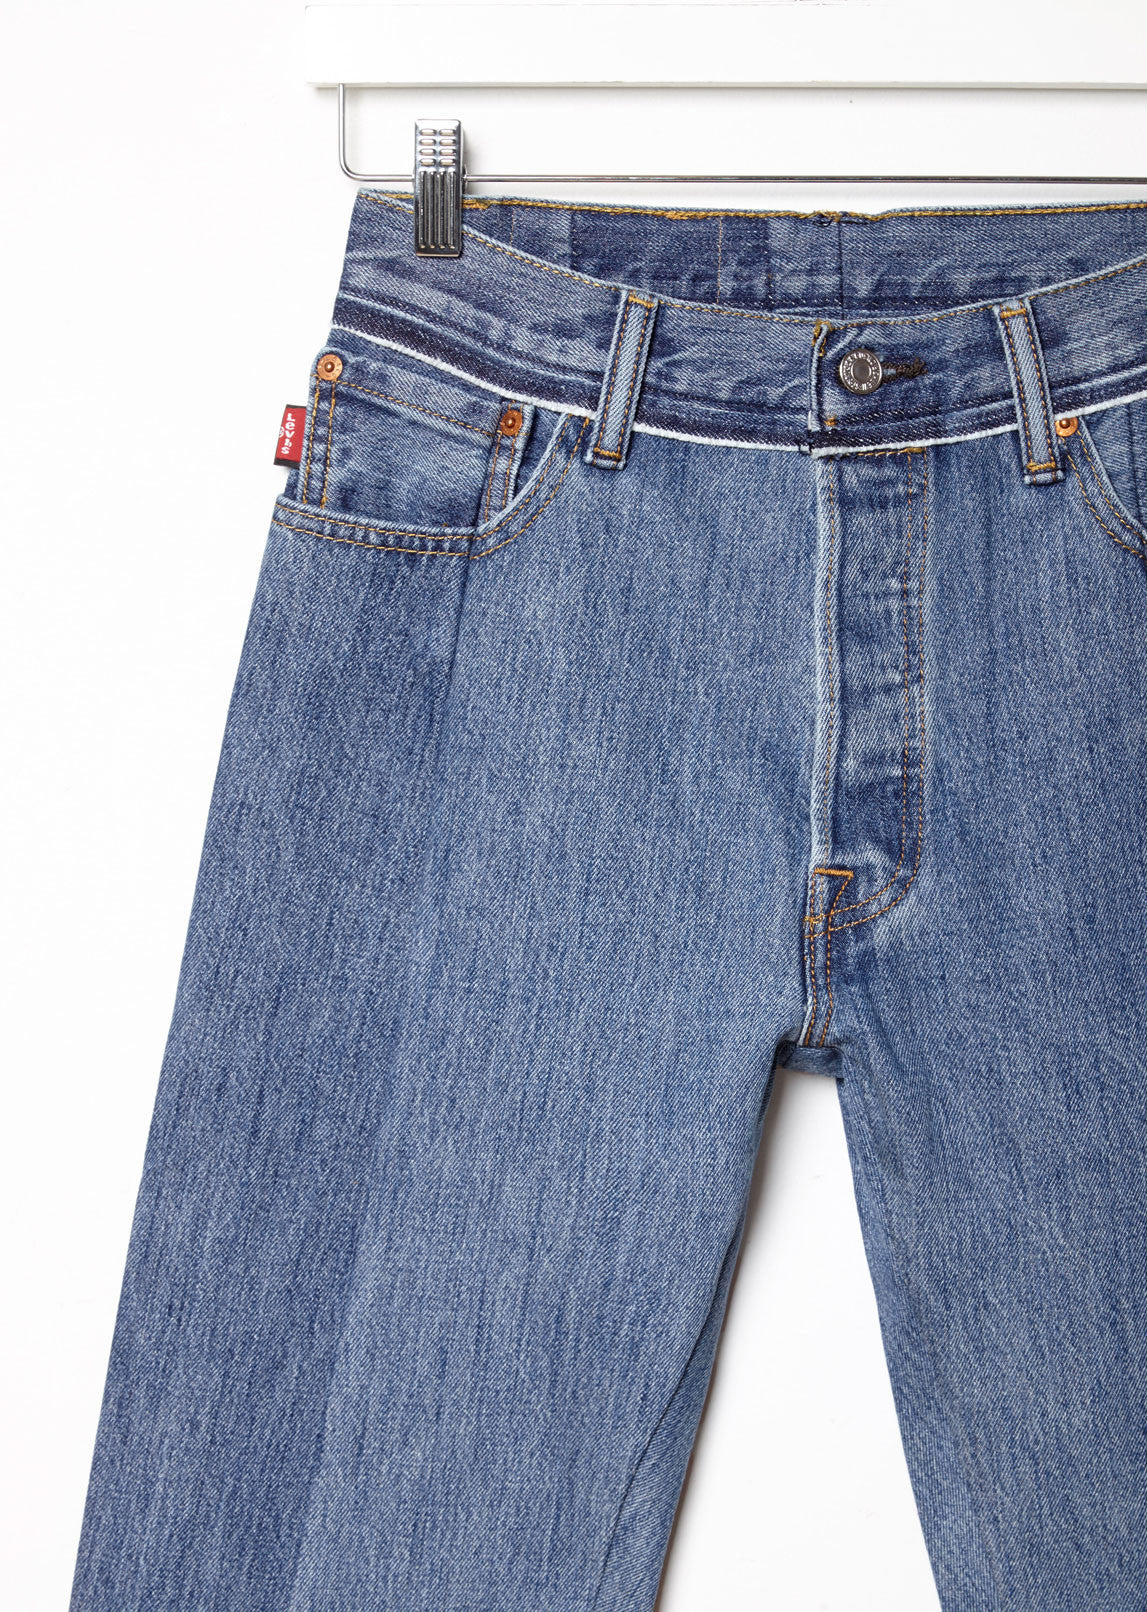 reworked levis jeans